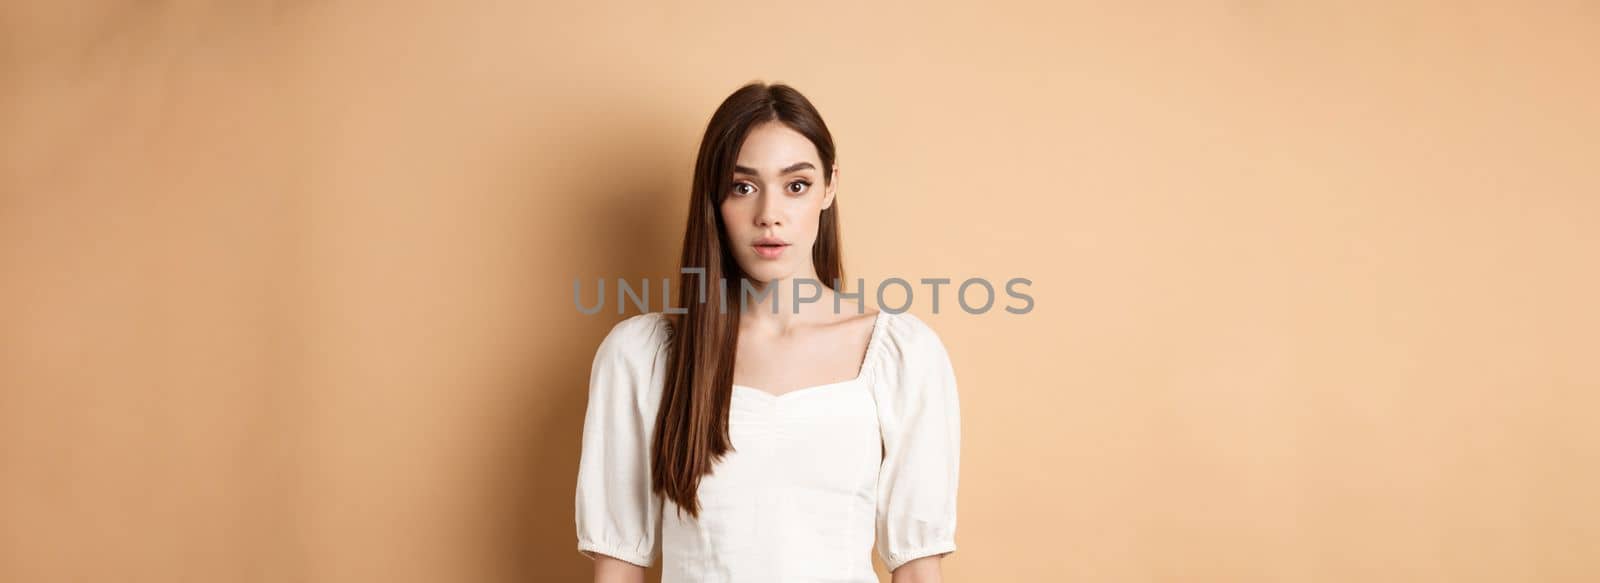 Shocked and startled young woman freeze in awe, open mouth and look at camera amazed, standing in dress on beige background.